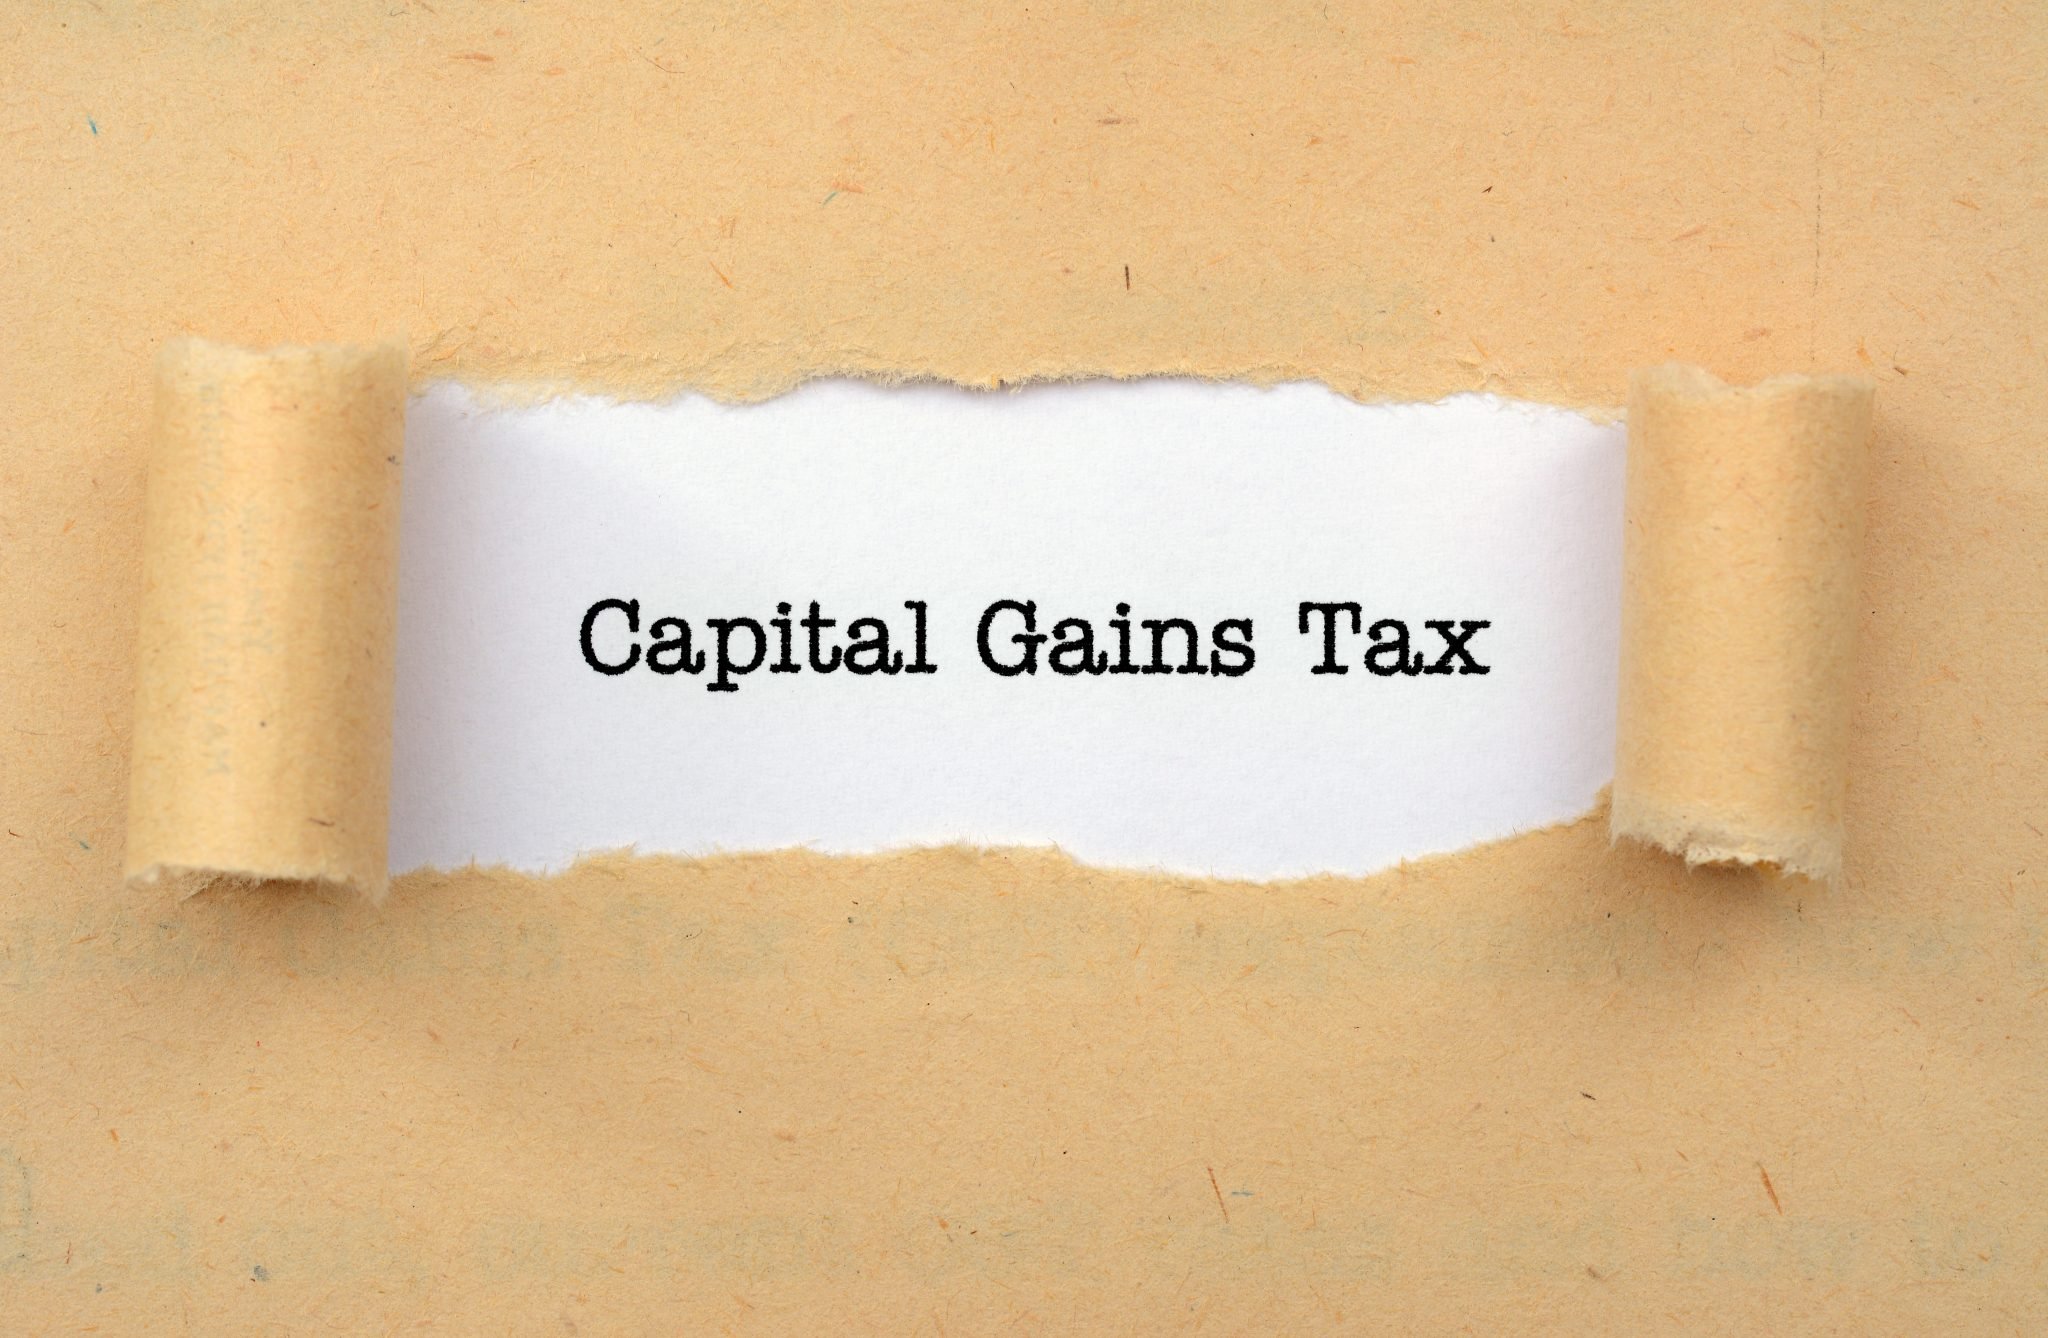 How to Avoid Capital Gains Tax on Stocks